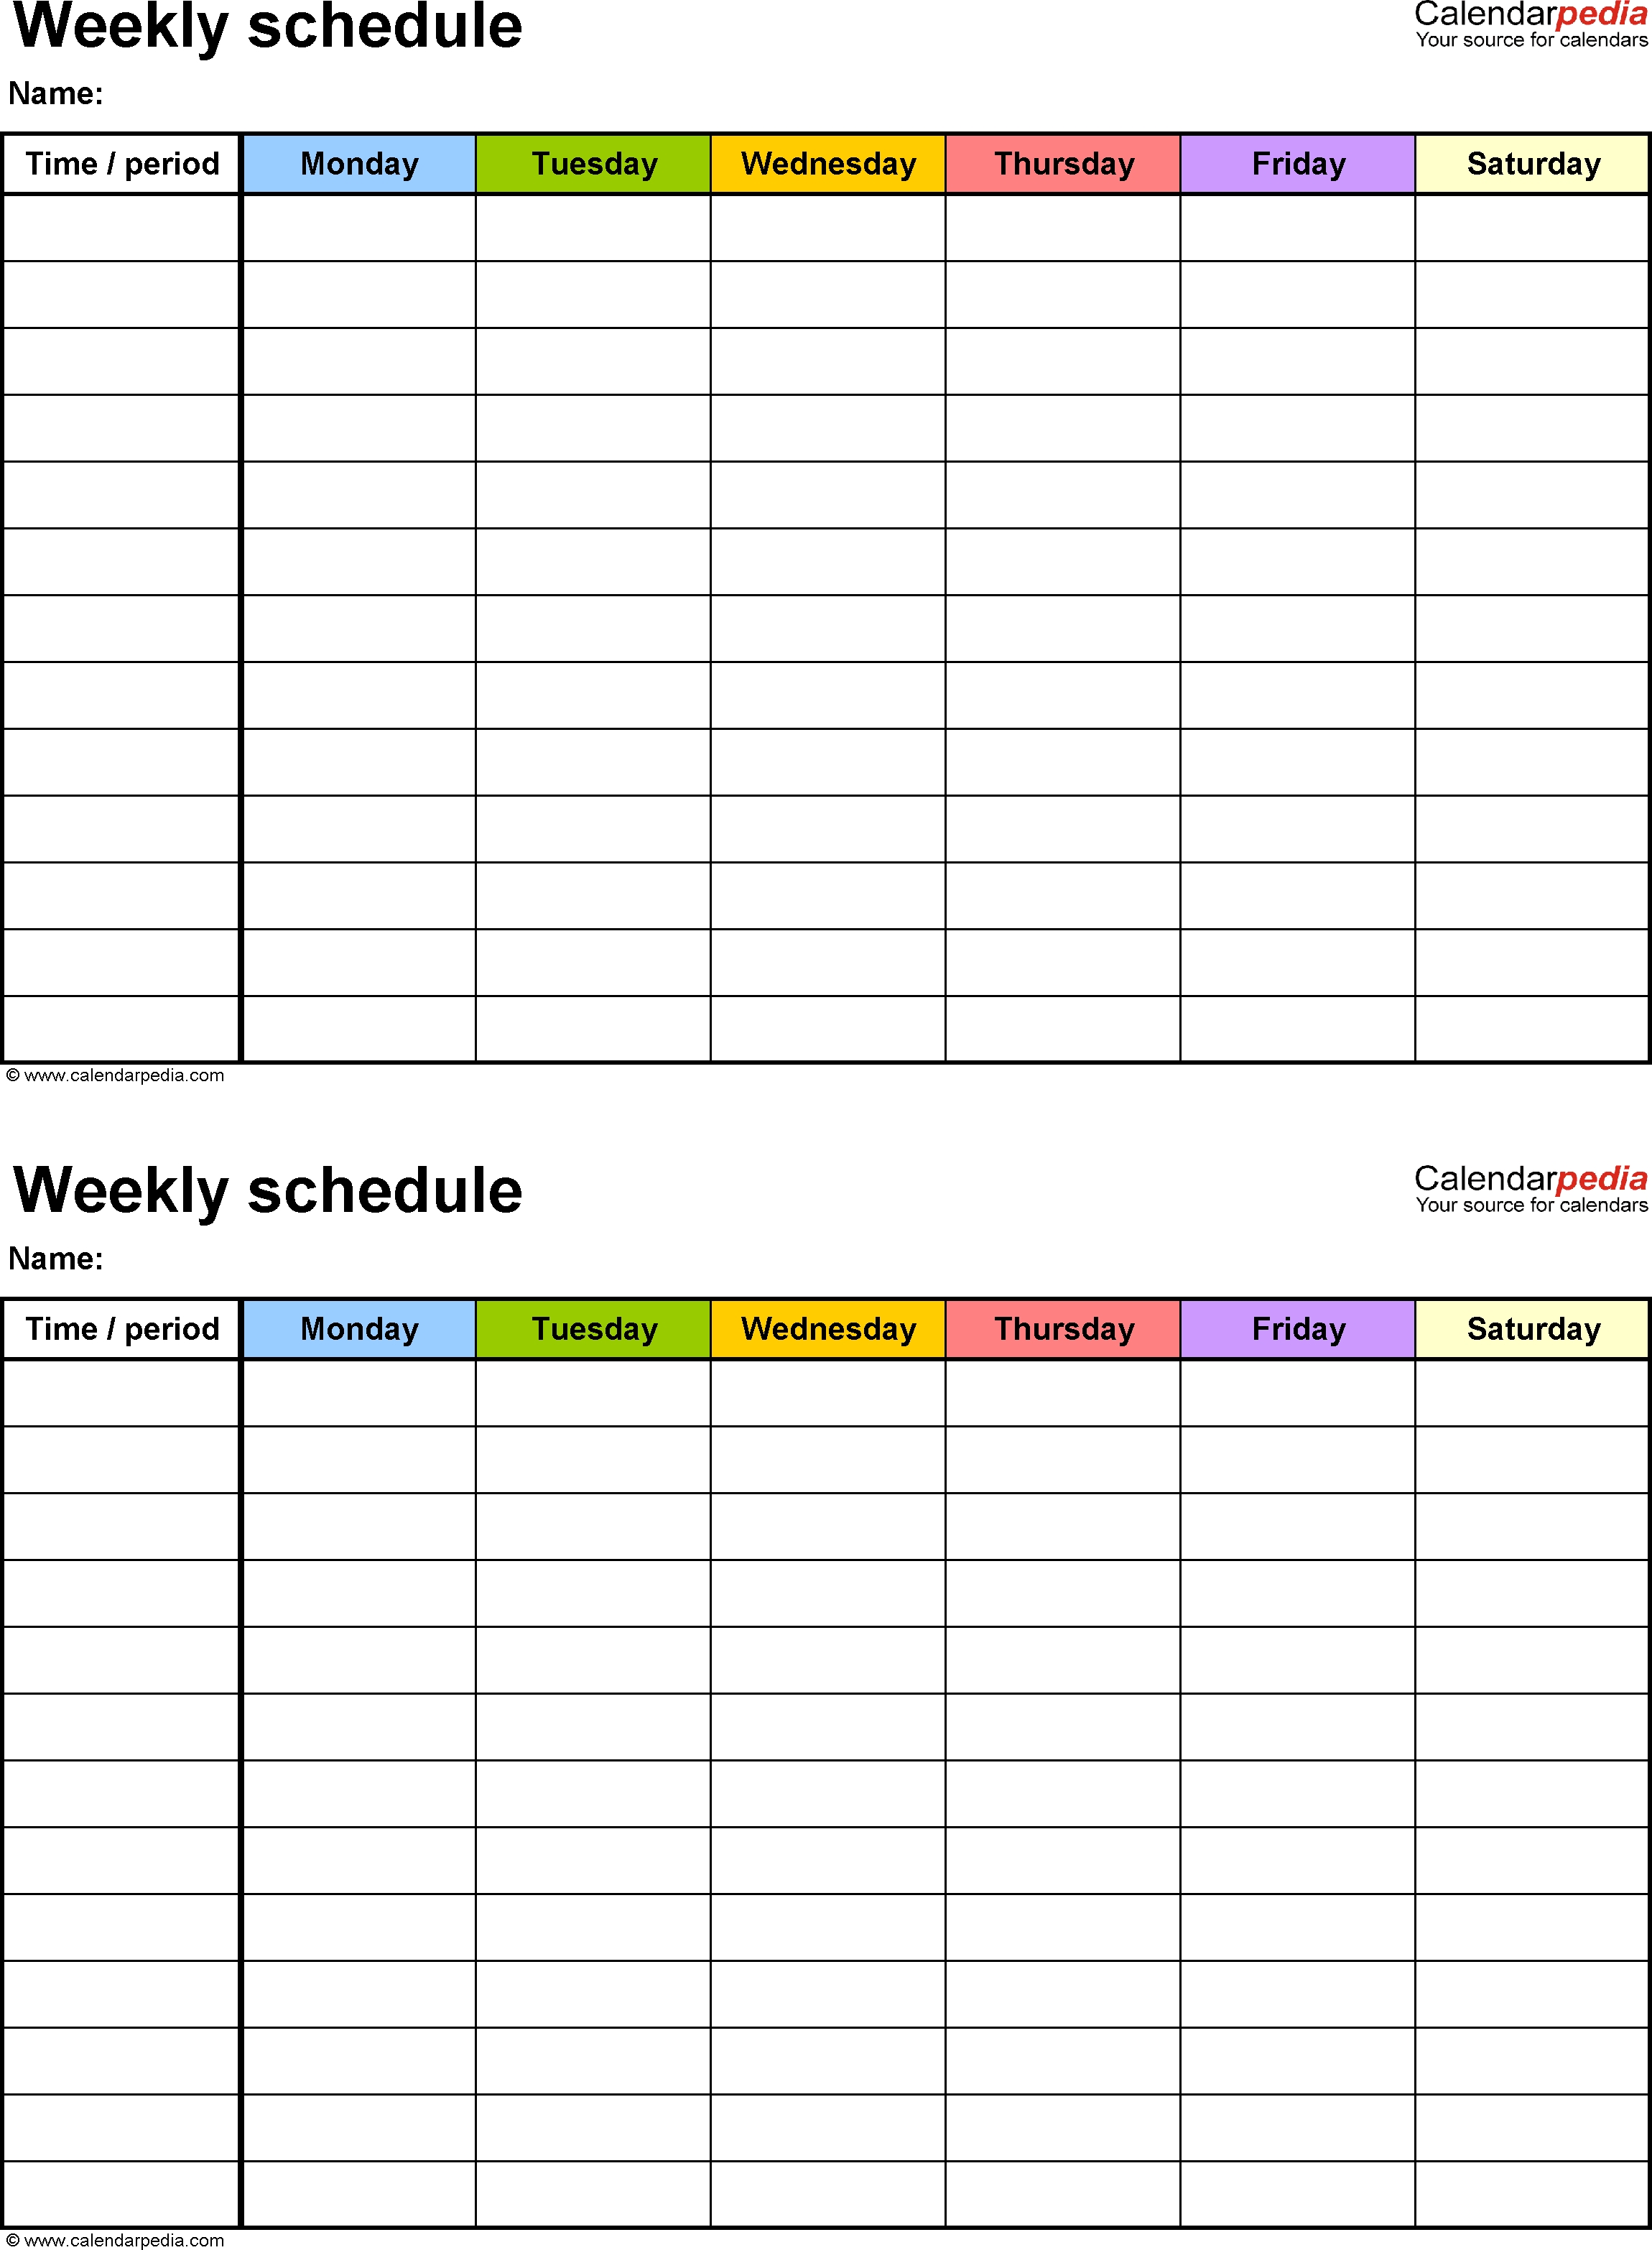 Free Weekly Schedule Templates For Word - 18 Templates pertaining to Weekly Planner Printable Day 7